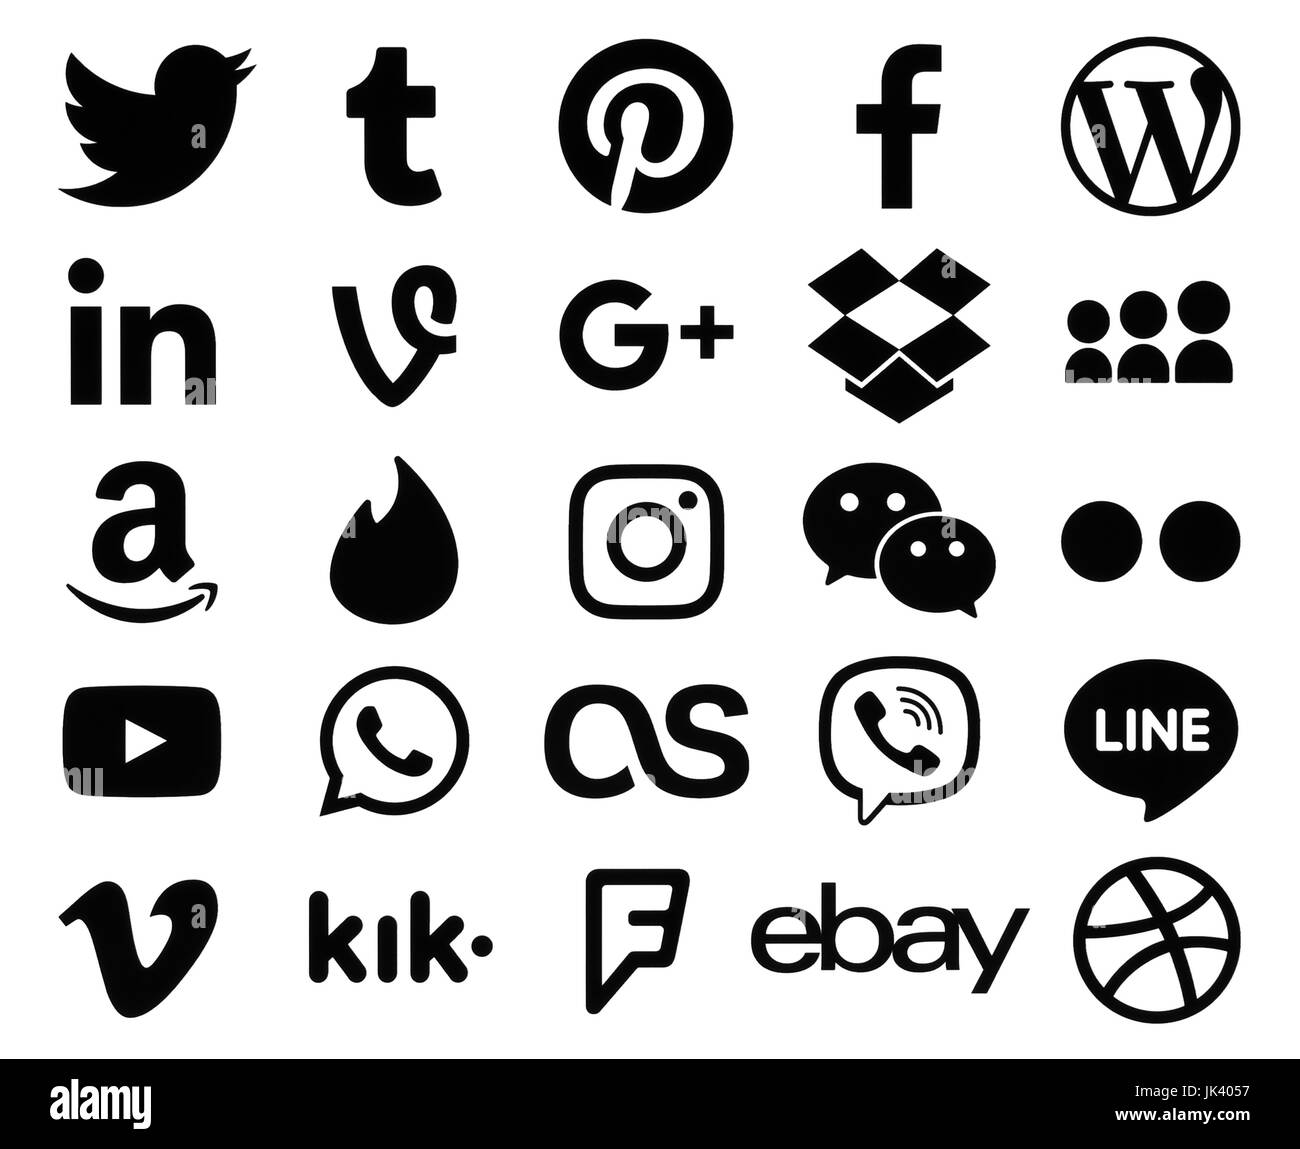 Kiev, Ukraine - April 27, 2017: Collection of popular black logo signs of social media icons, printed on paper: Facebook, Twitter, Google Plus, Instag Stock Photo